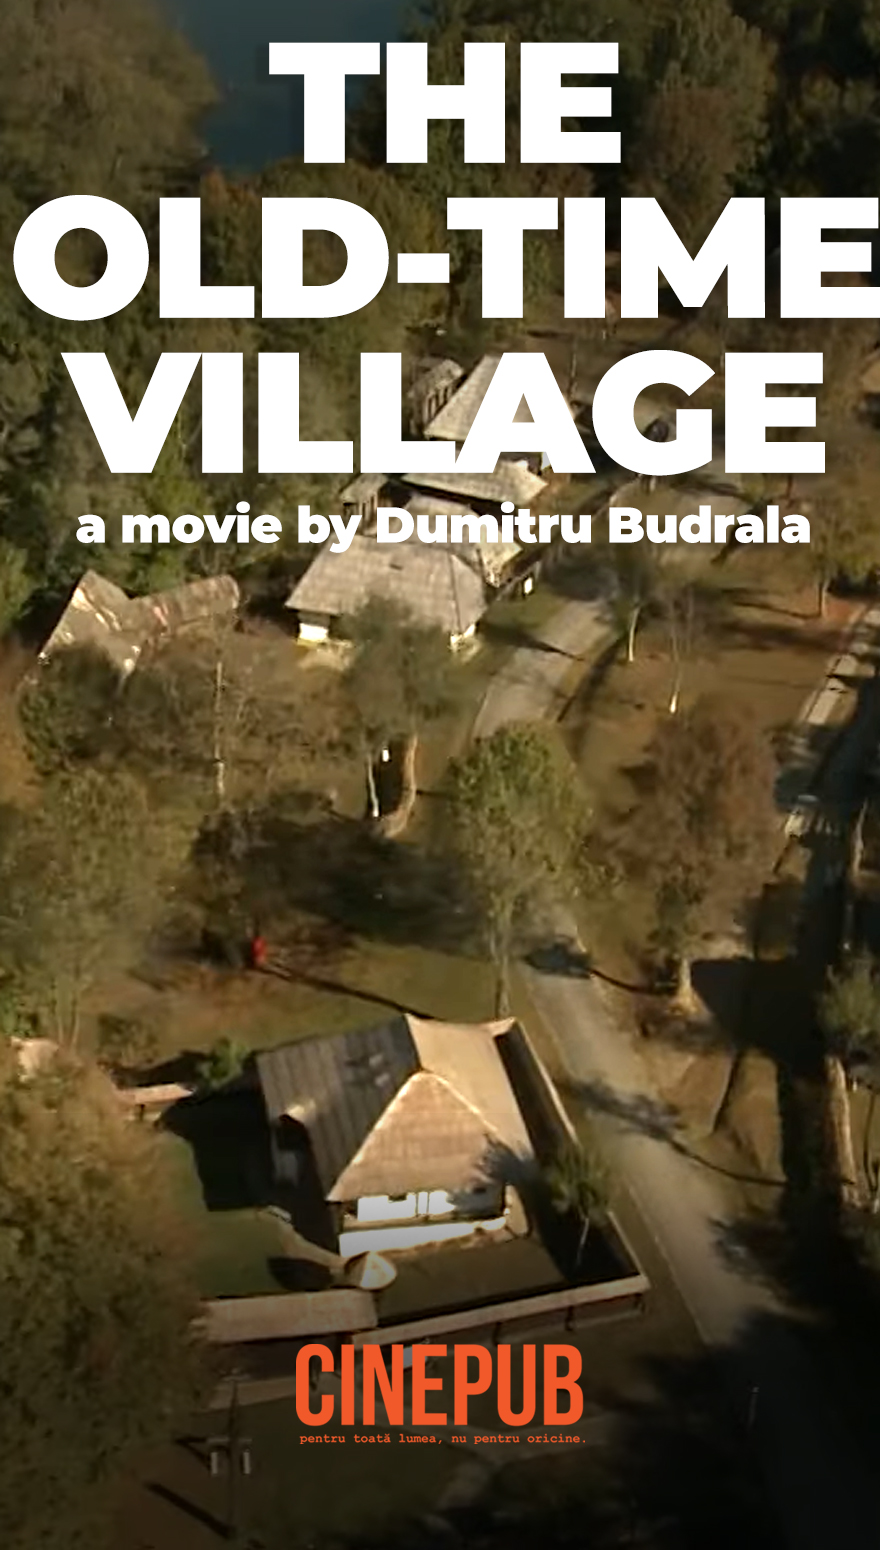 The Old Time Village - documentary online on CINEPUB